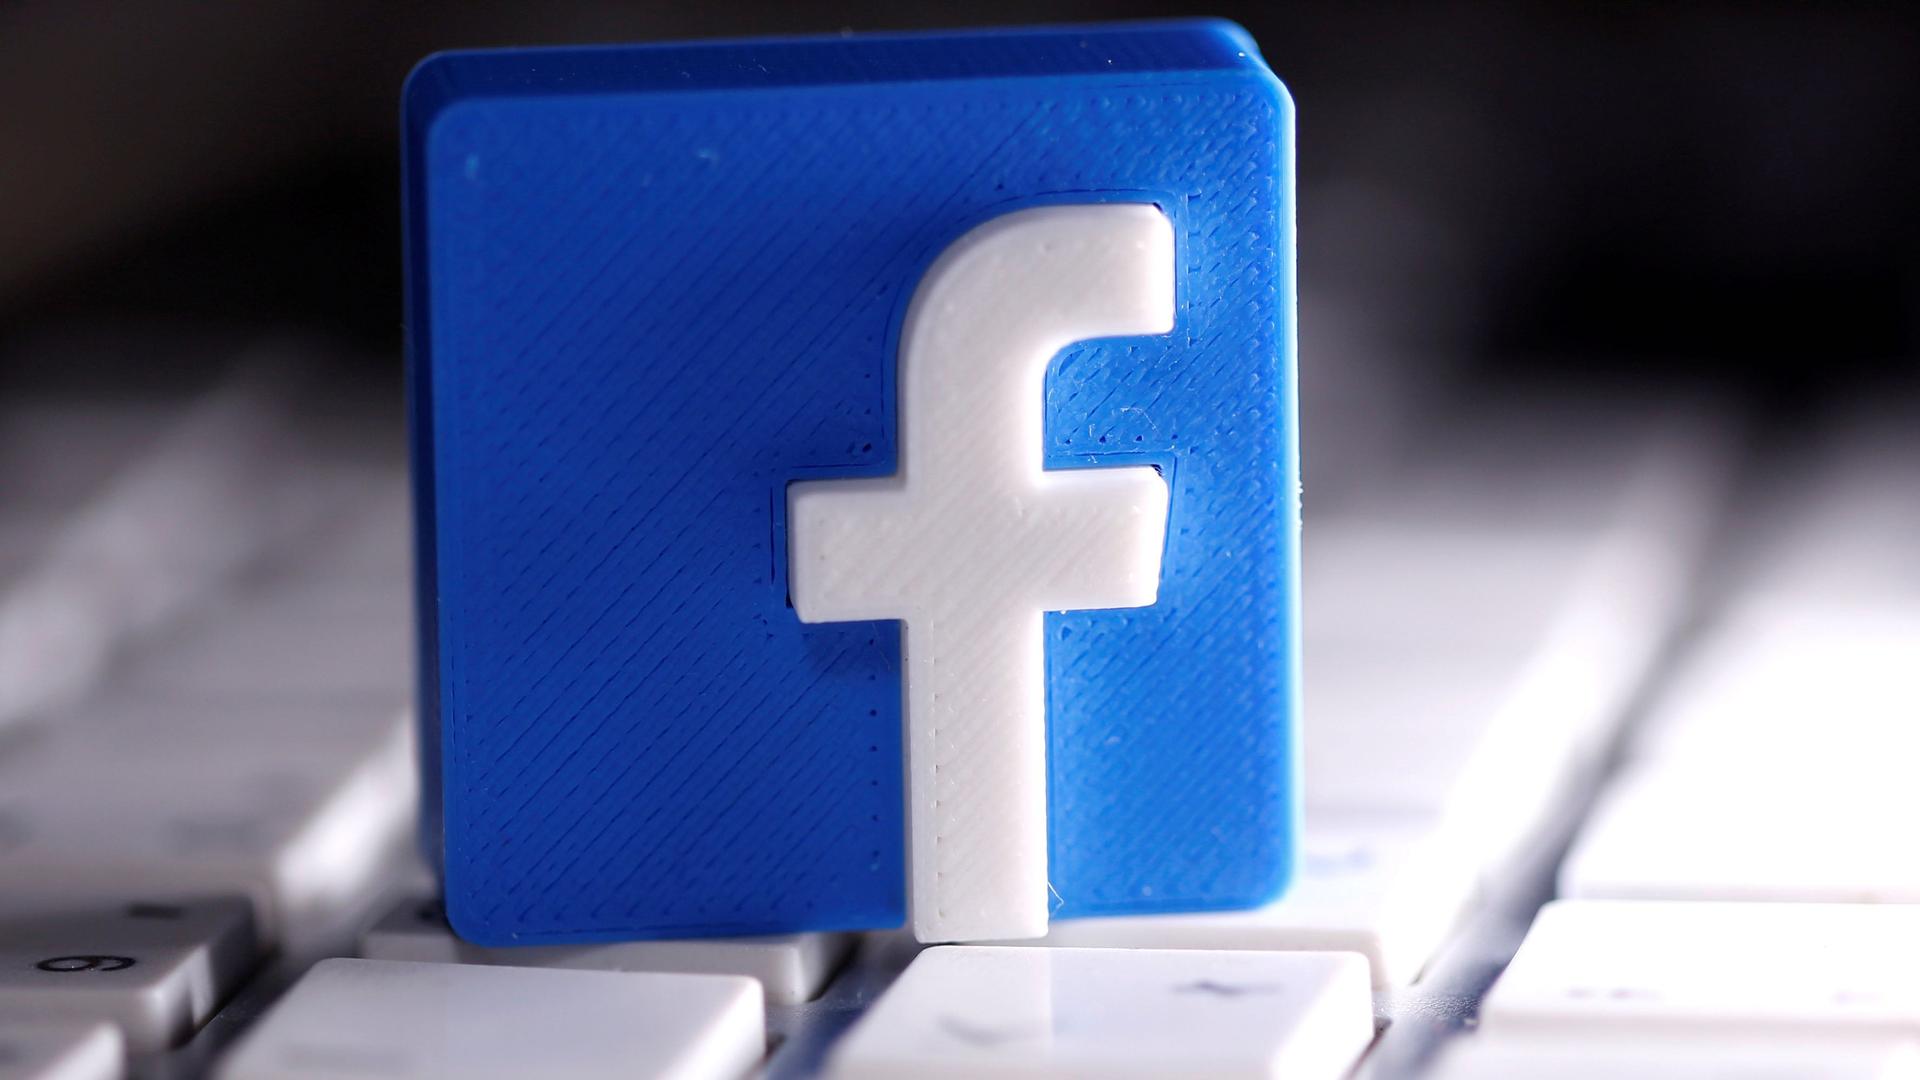 A 3D-printed Facebook logo is seen placed on a keyboard in this illustration taken March 25, 2020.